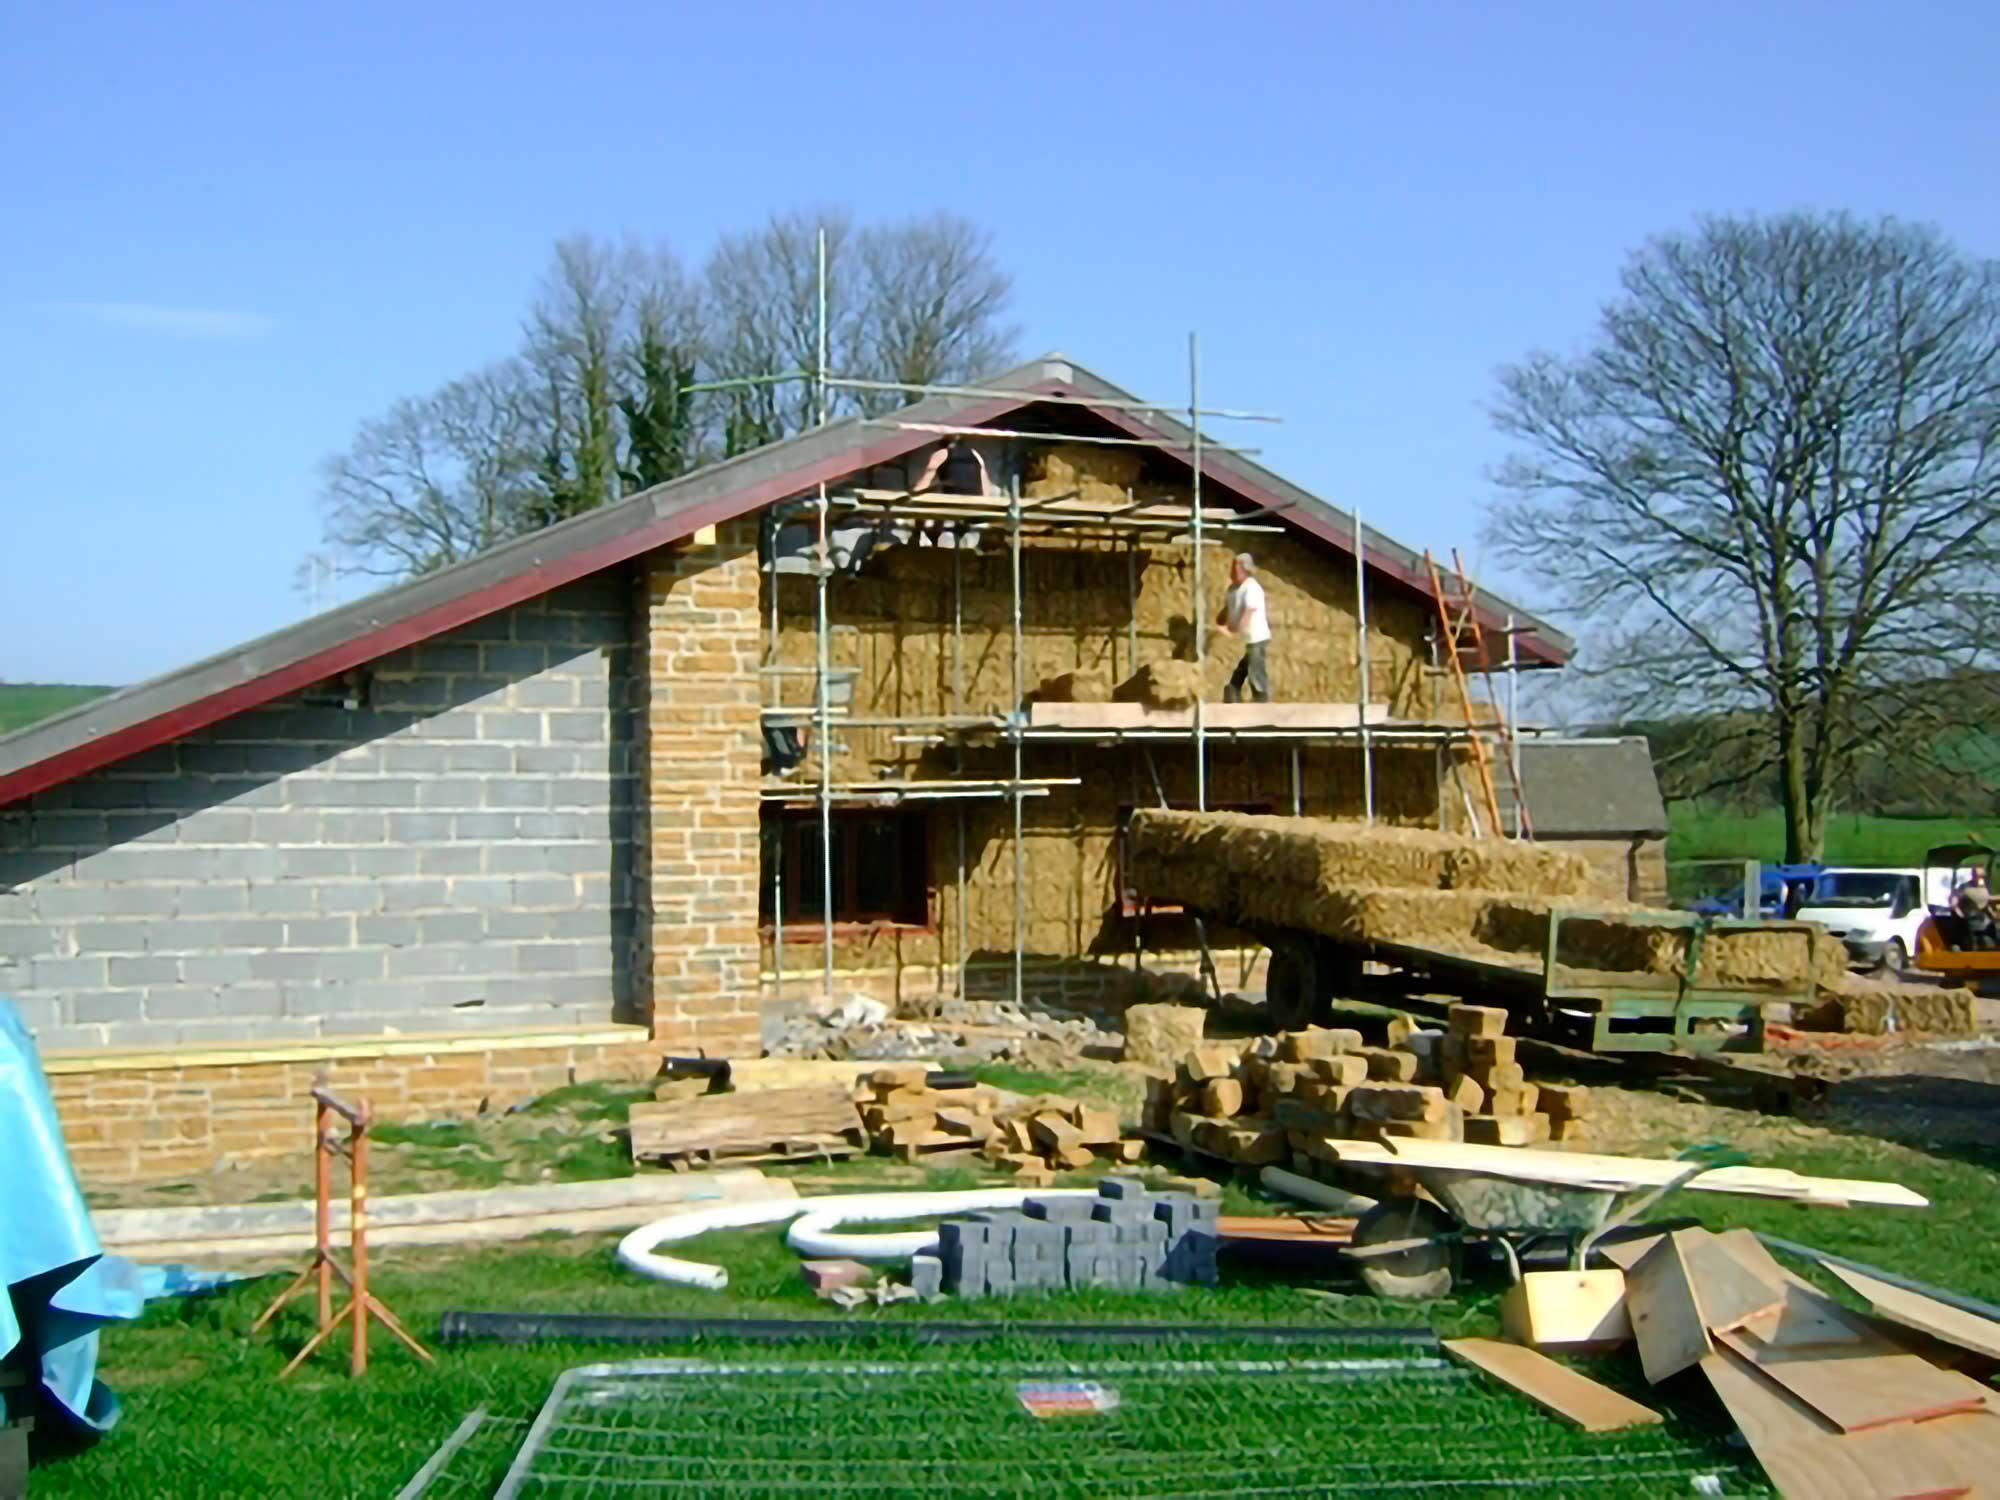 Photo of the centre showing breeze blocks and a constructor fitting in hay on scaffolding